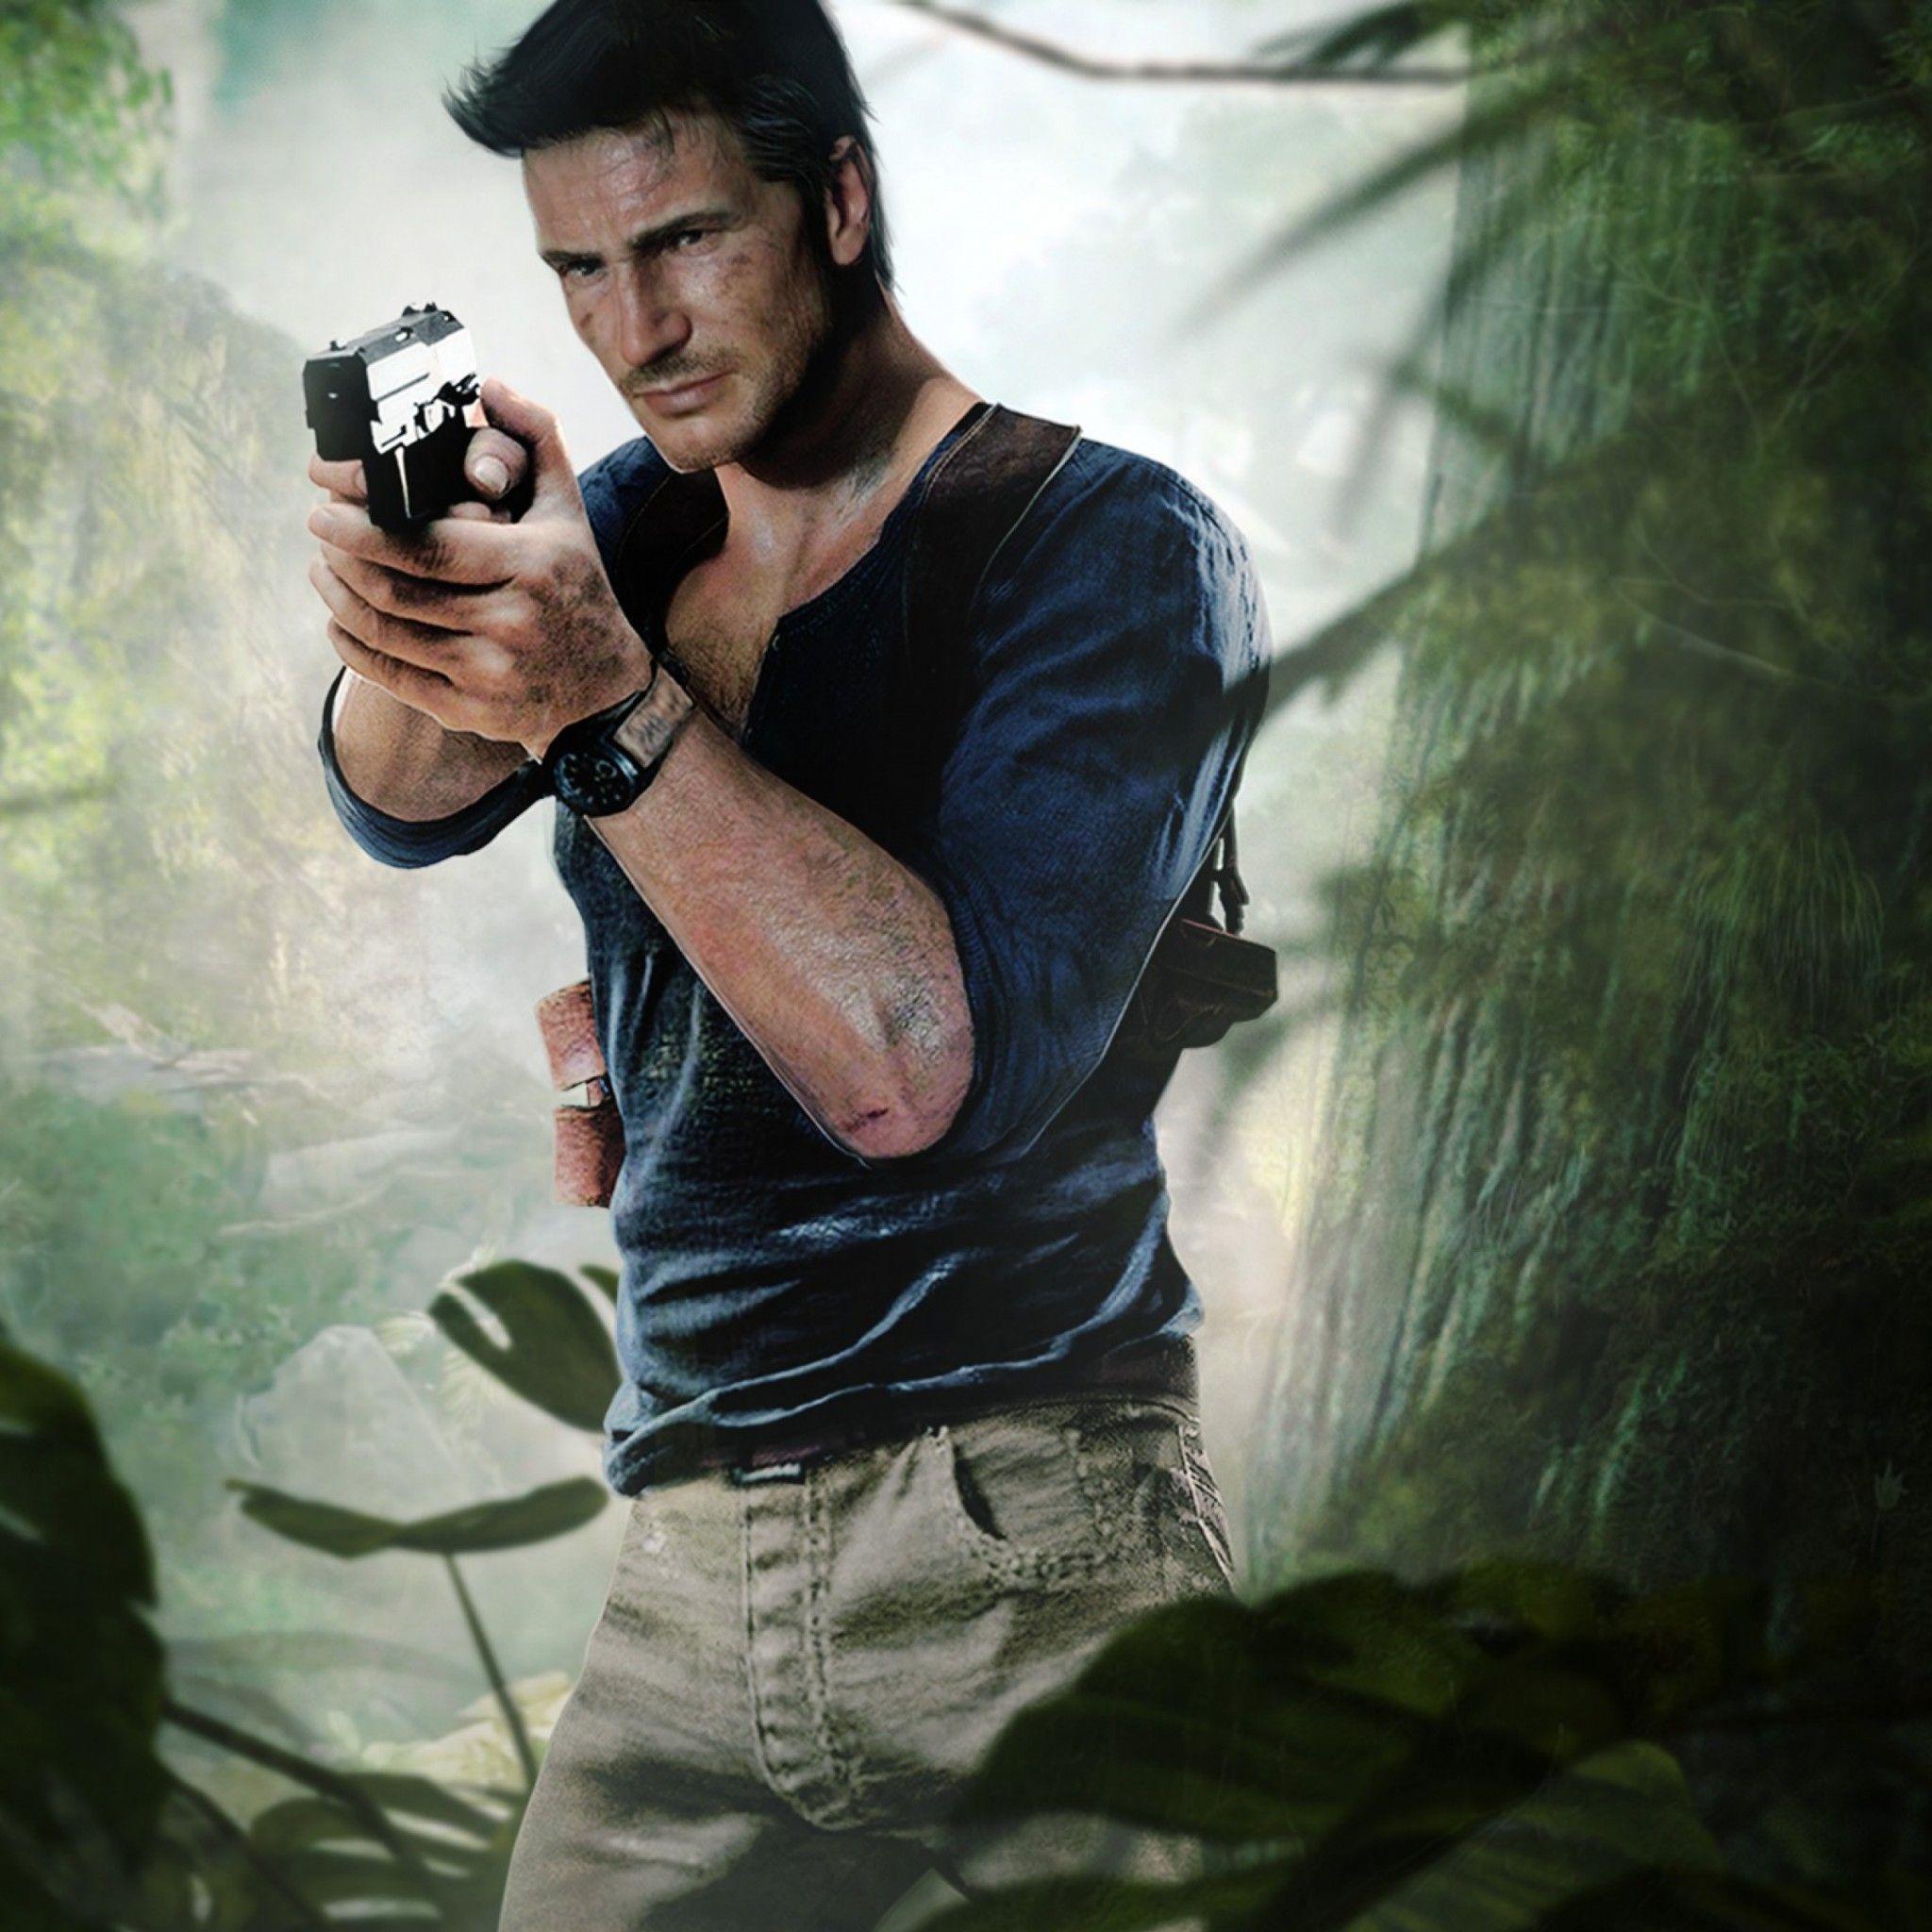 Naughty Dog Uncharted to see more wallpaper of Uncharted 4: A